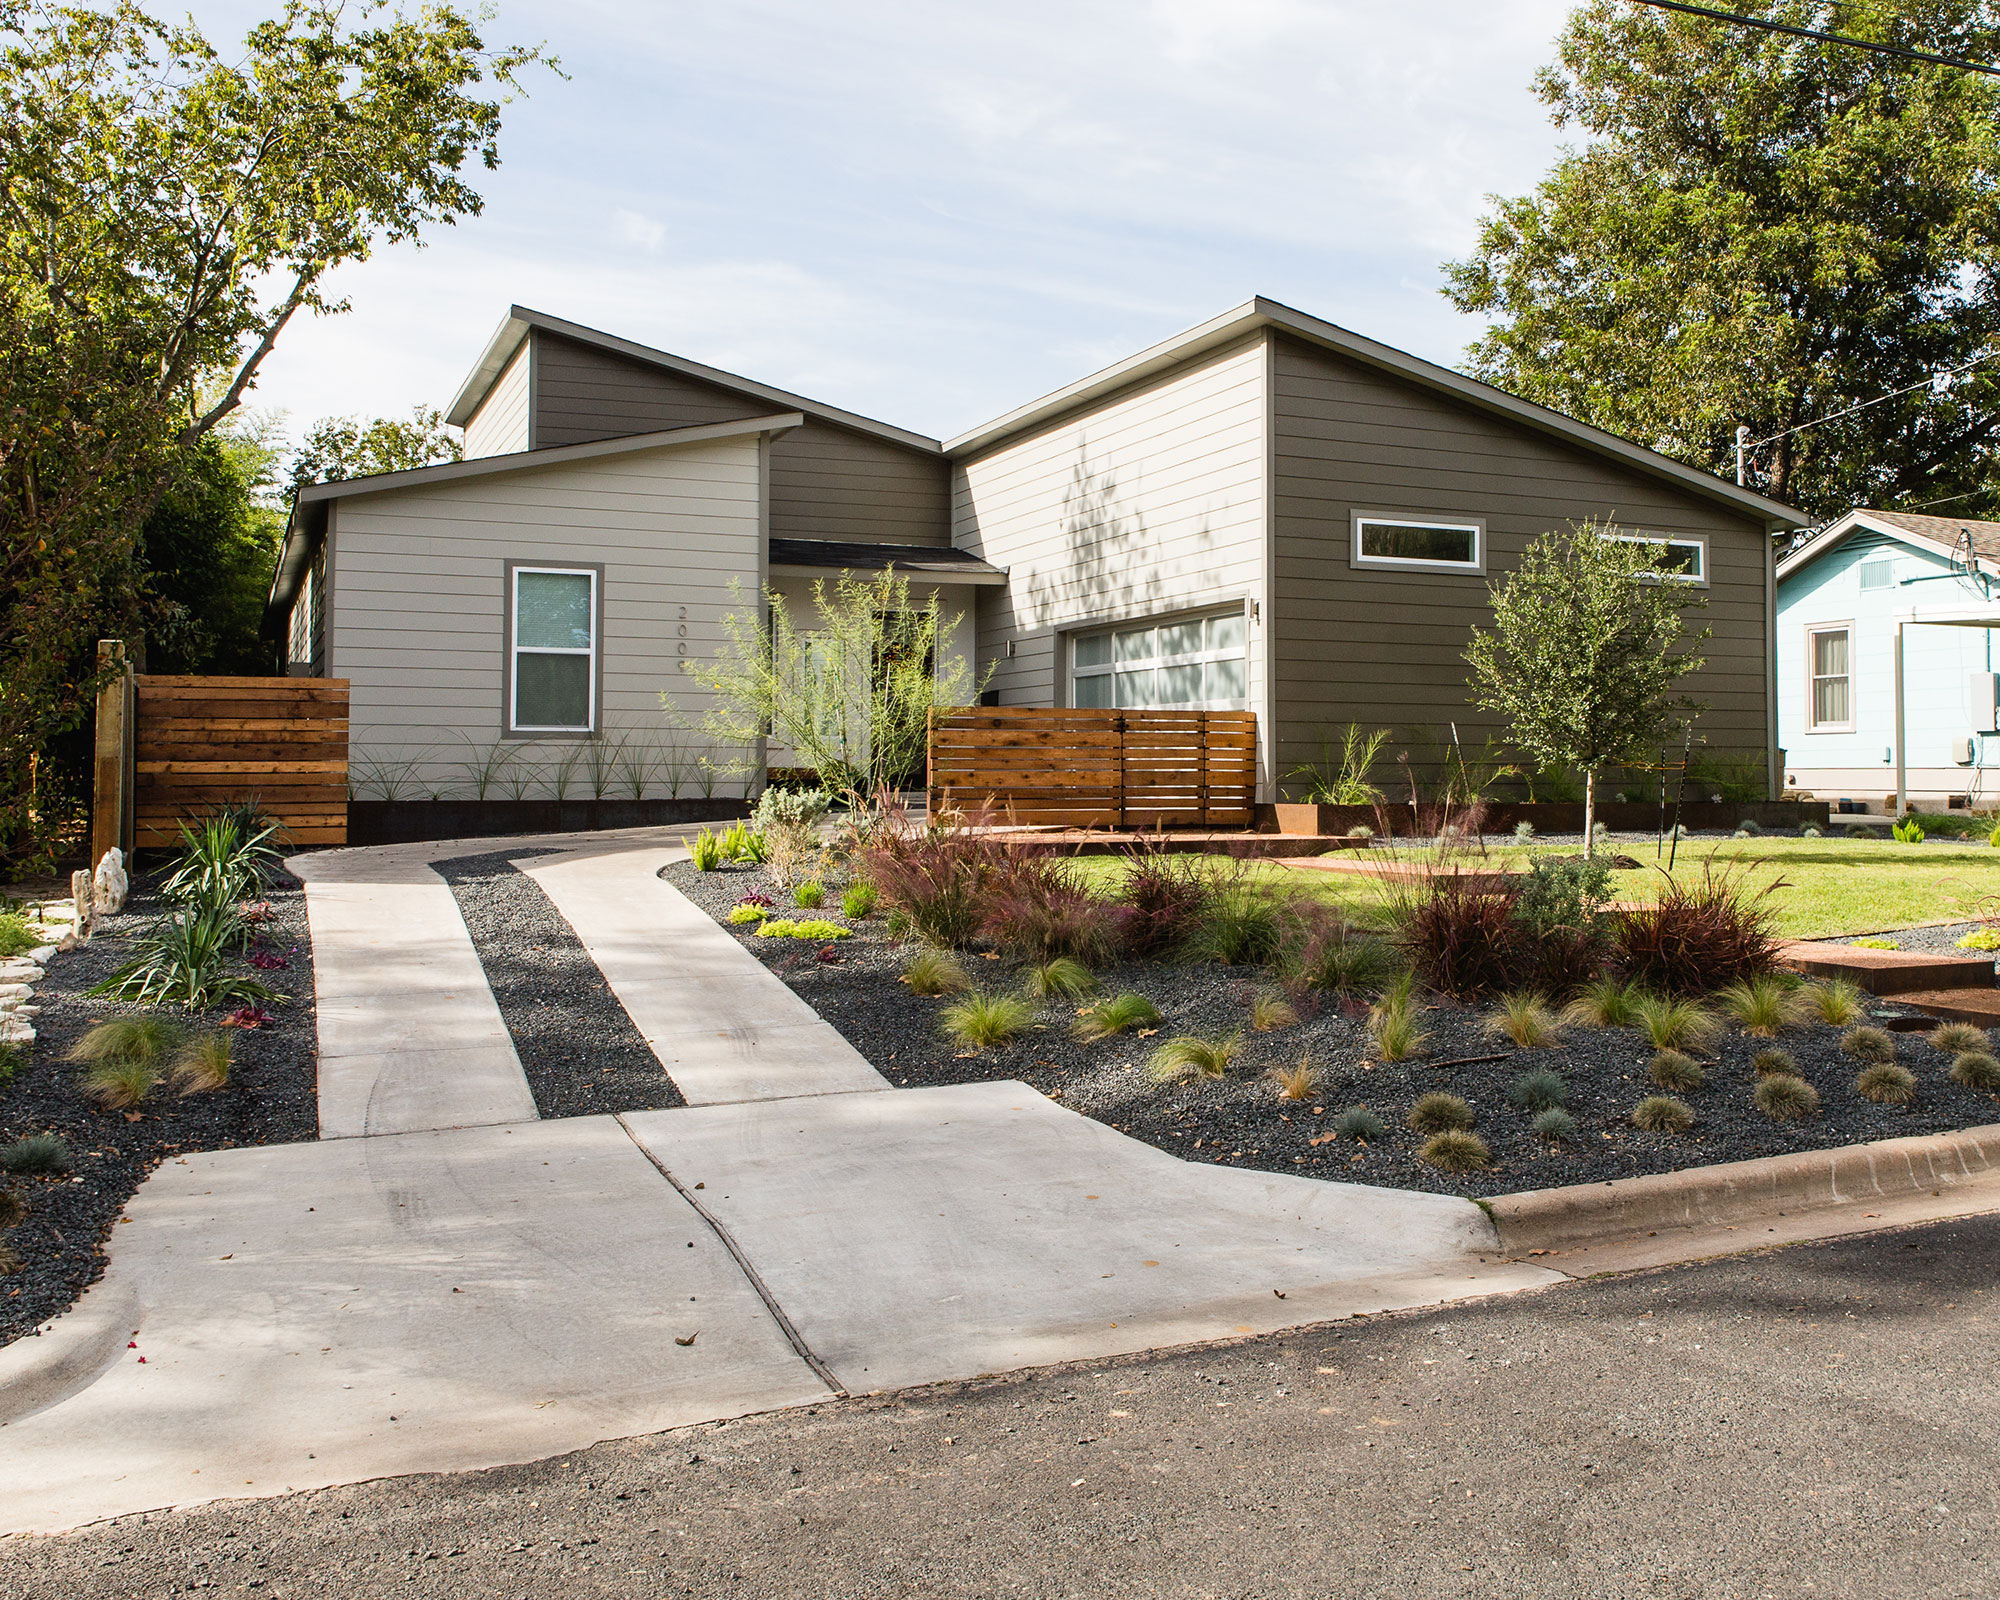 front yard with driveway, lawn and flowerbeds planted with grasses